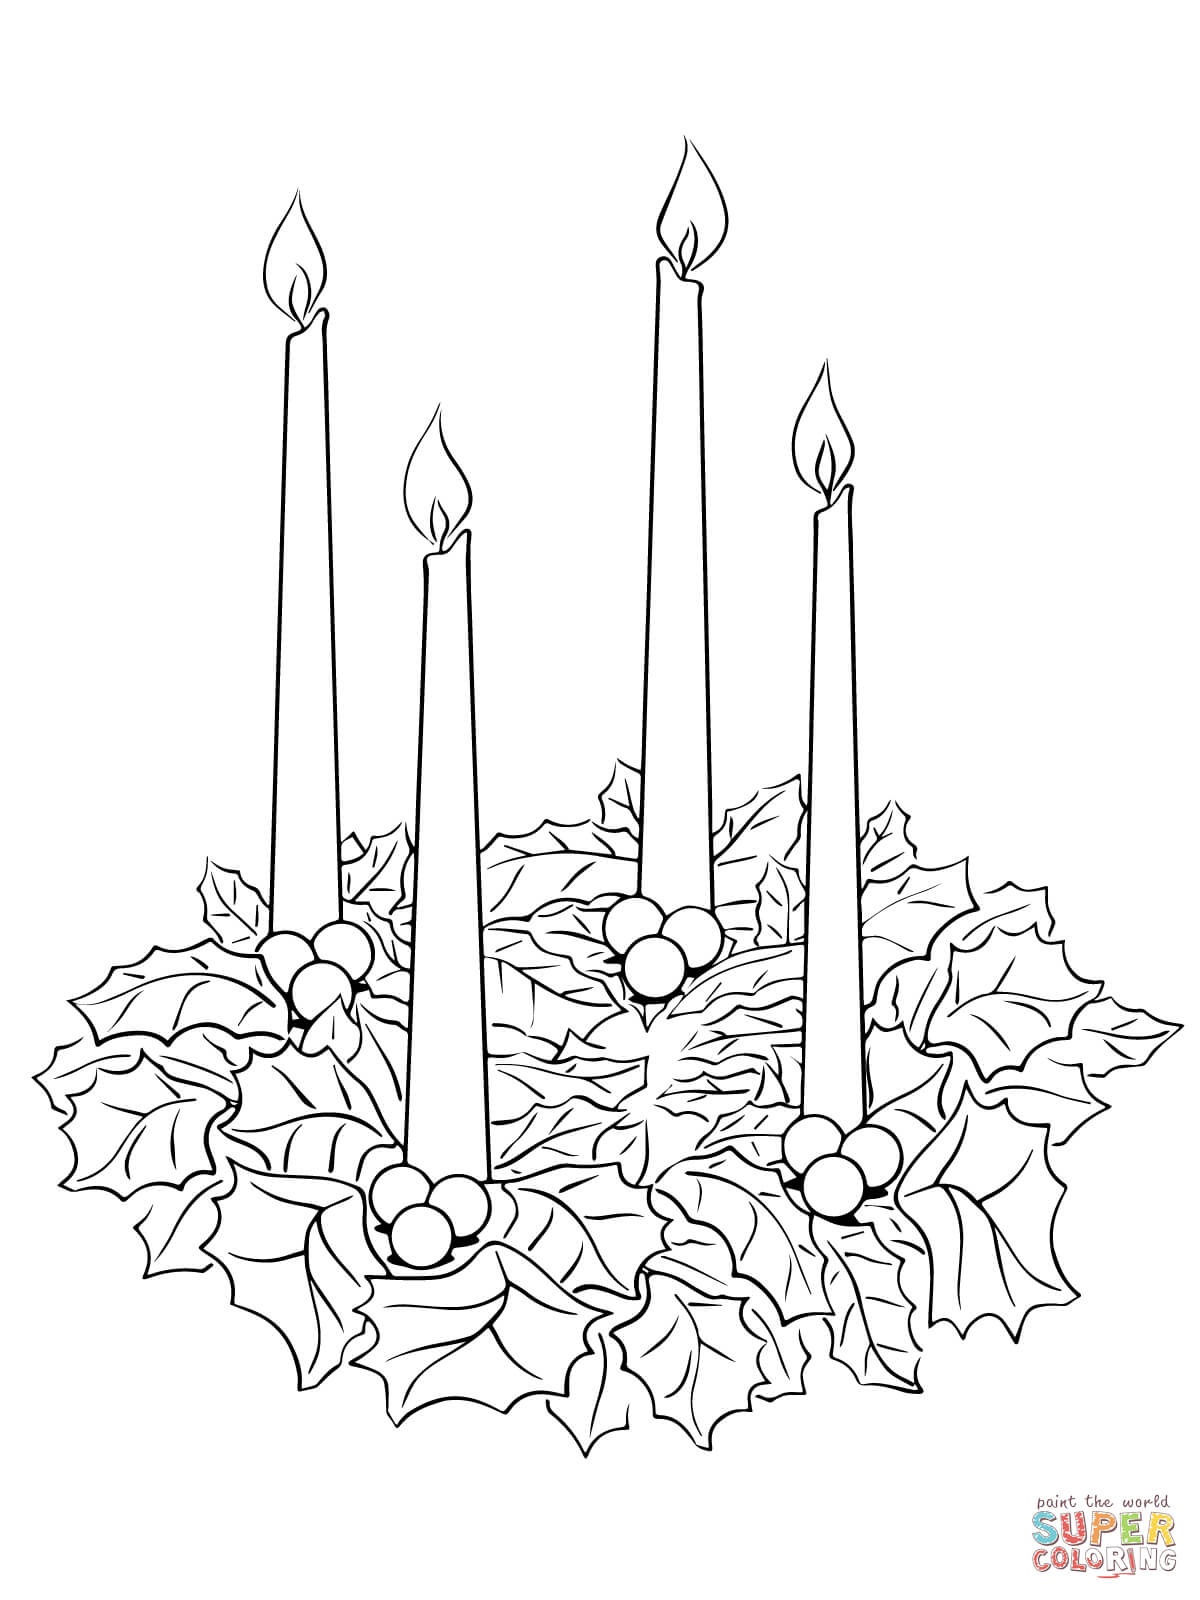 Advent Wreath Coloring Page | Free Printable Coloring Pages - Free Printable Advent Wreath